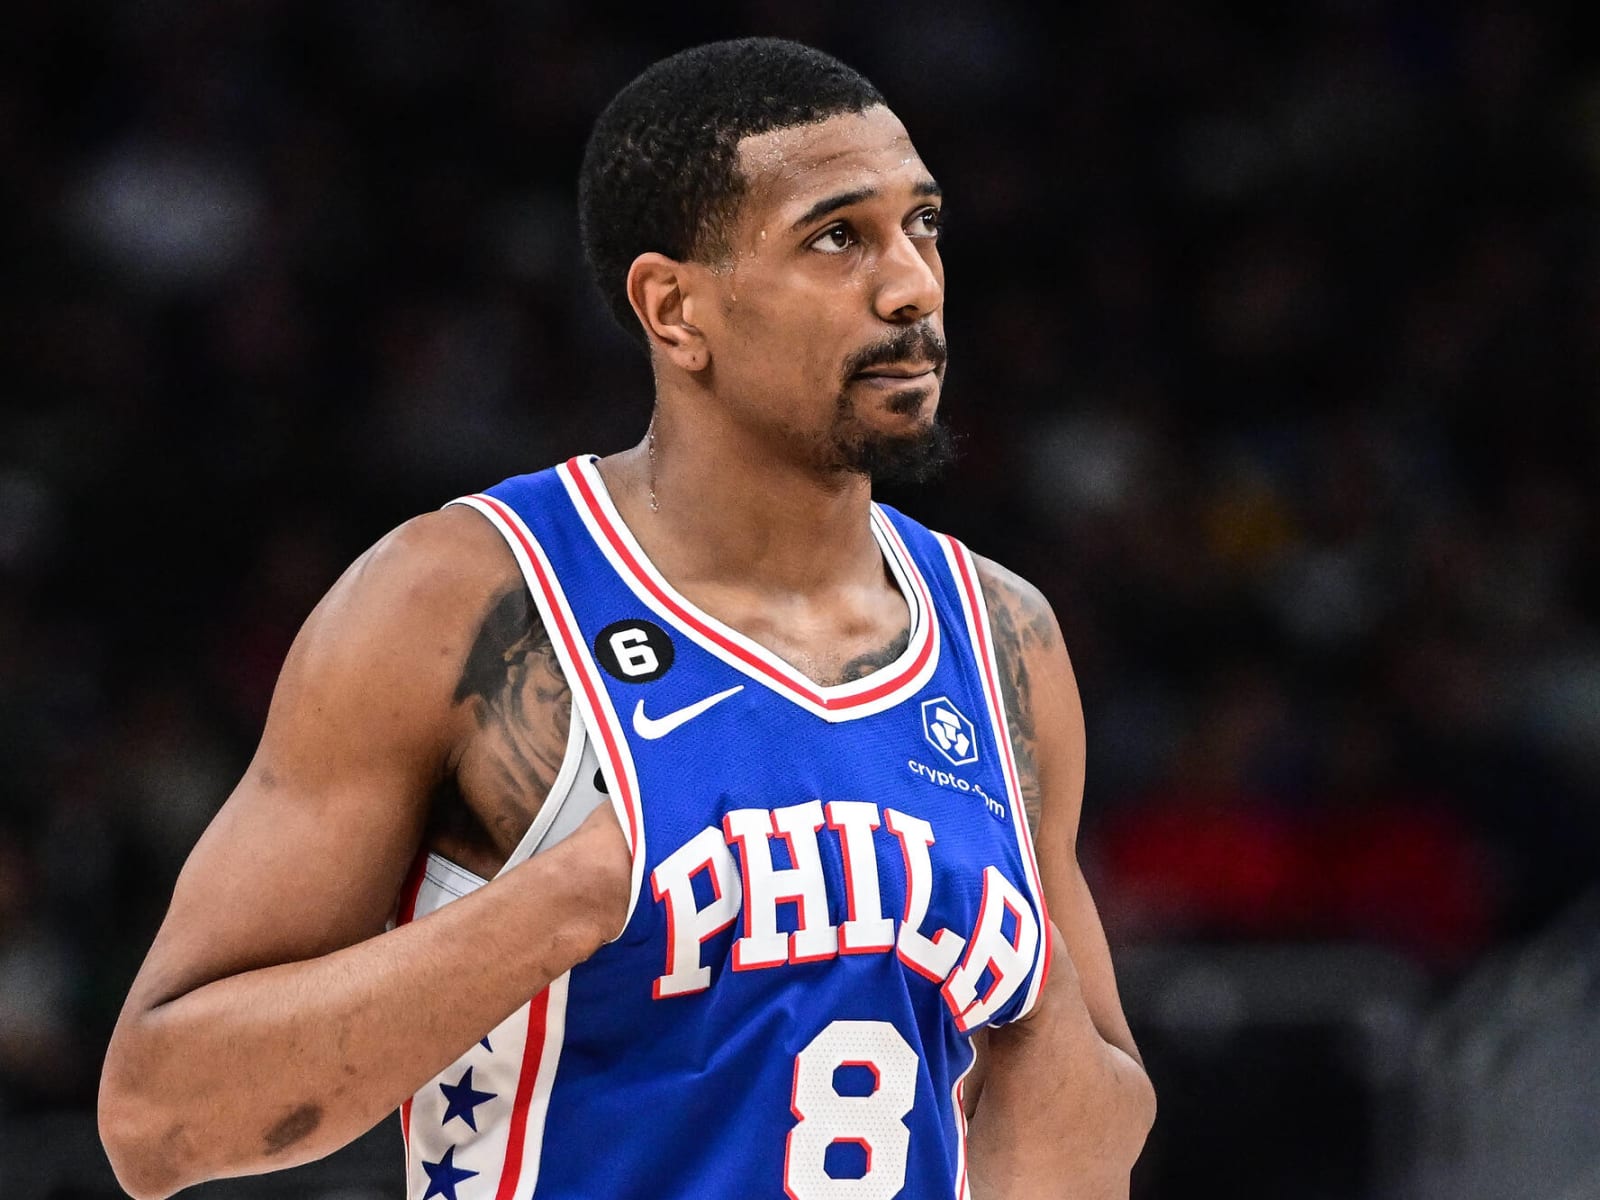 NBA playoffs: De'Anthony Melton emerging as playoff contributor for 76ers